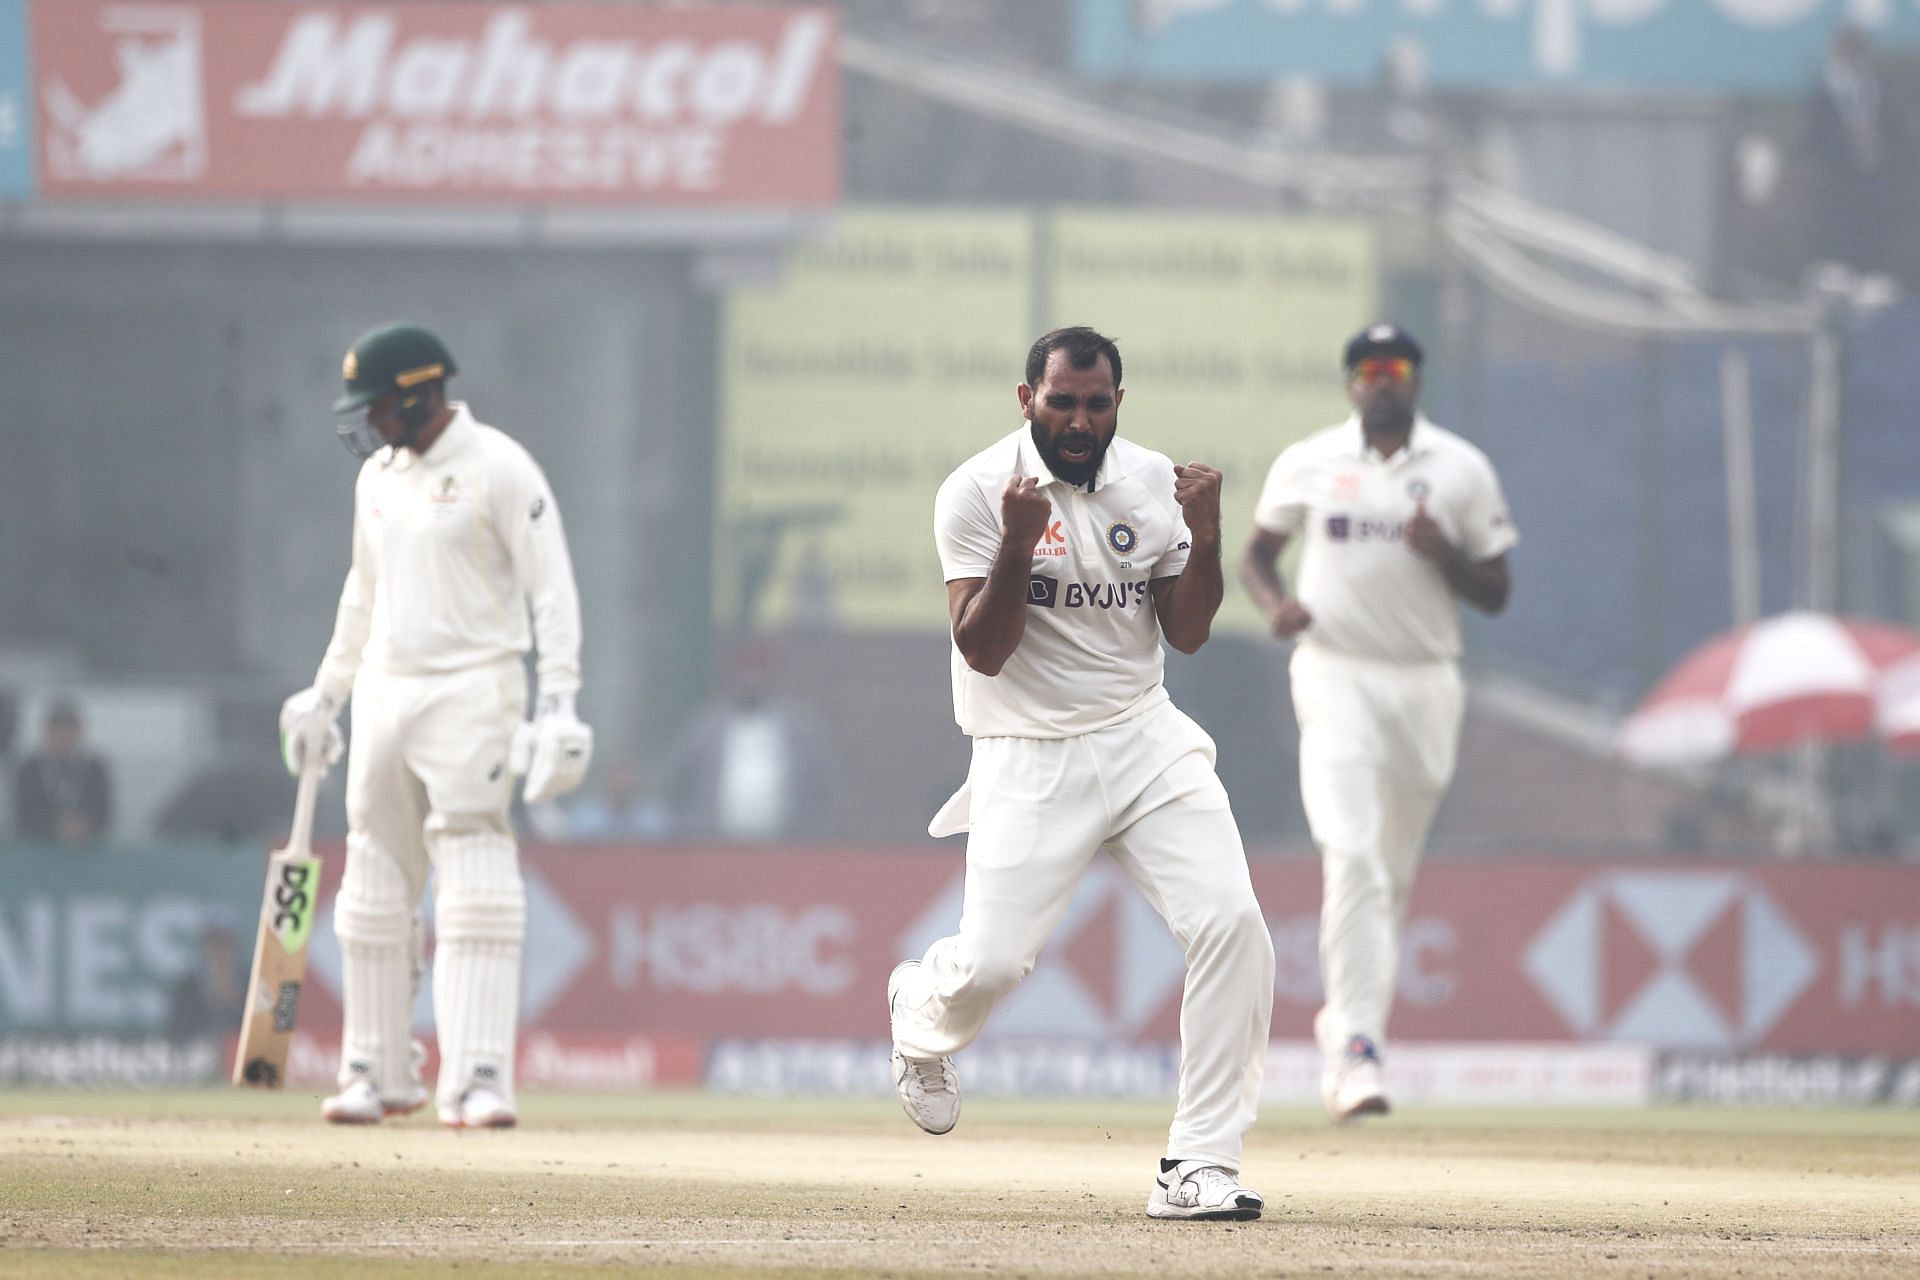 Mohammed Shami celebrates a wicket. (Pic: Getty Images)